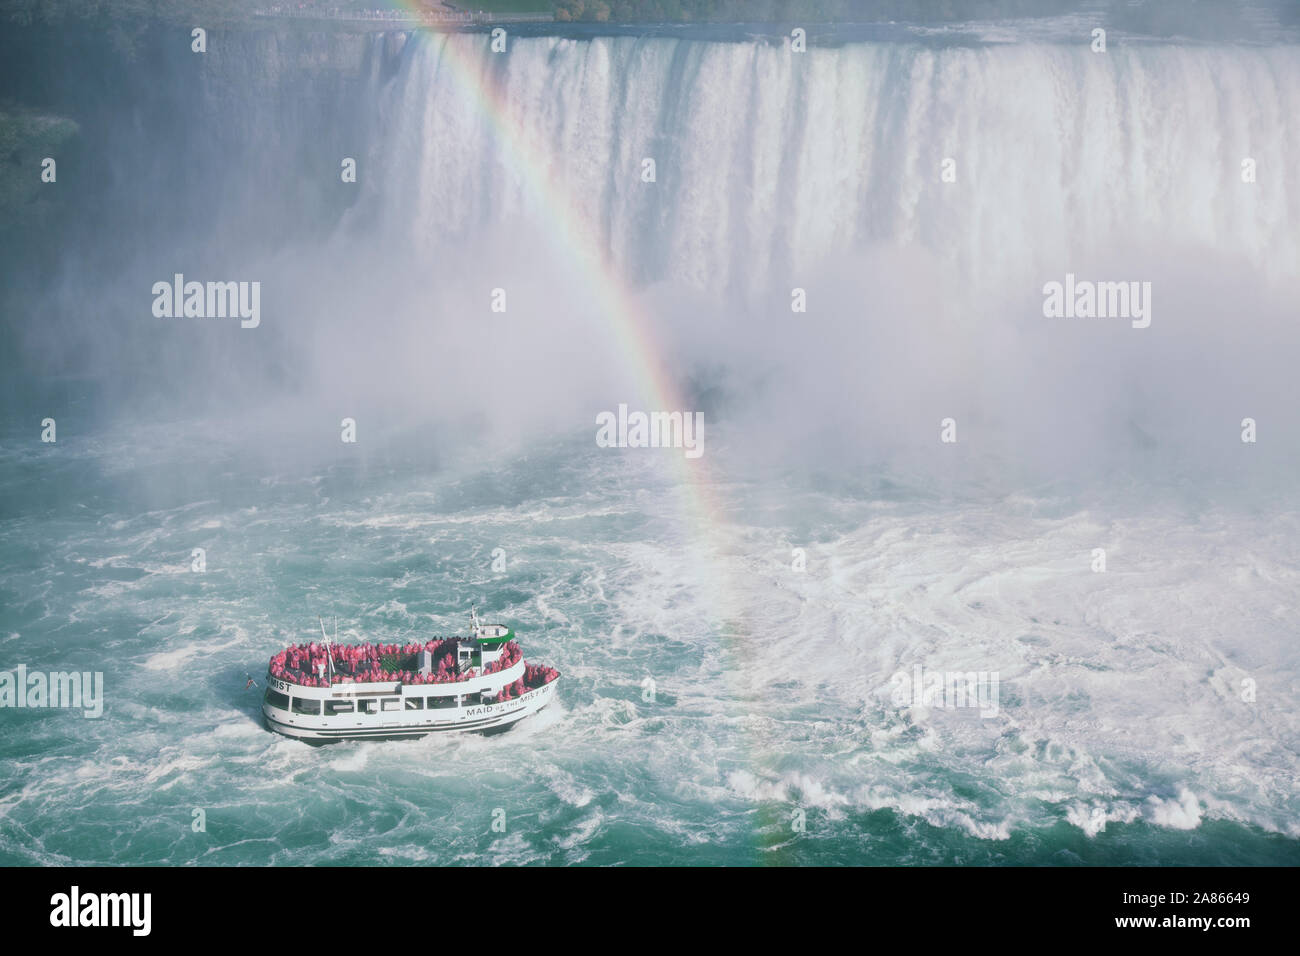 OCTOBER 20, 2019-NIAGARA FALLS, CANADA: The Maid of the Mist boat ride takes passengers close to the Horseshoe Falls in Niagara Falls Canada with a ra Stock Photo